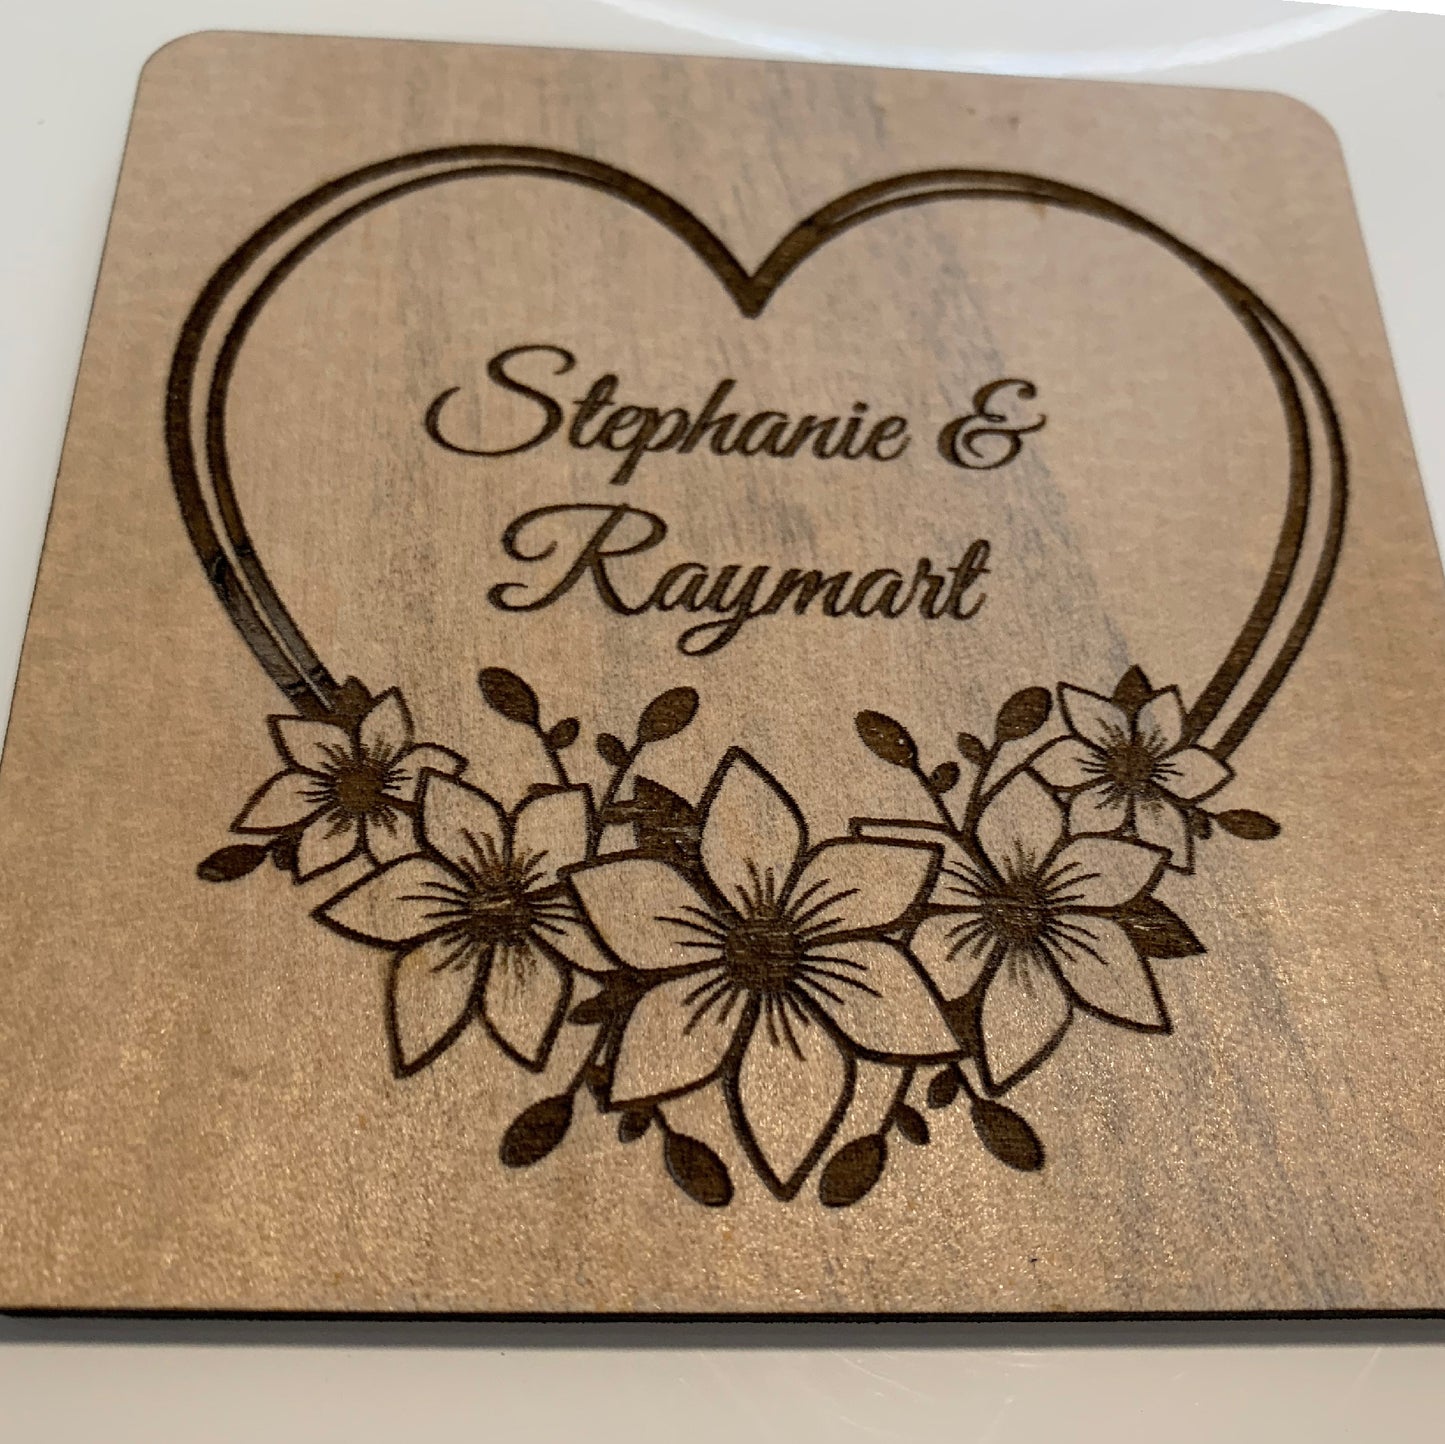 Heart with flowers wedding party favors, 8 pieces wood coasters party favors wedding, wedding party favors for guests, personalized wedding favors, custom wedding coasters